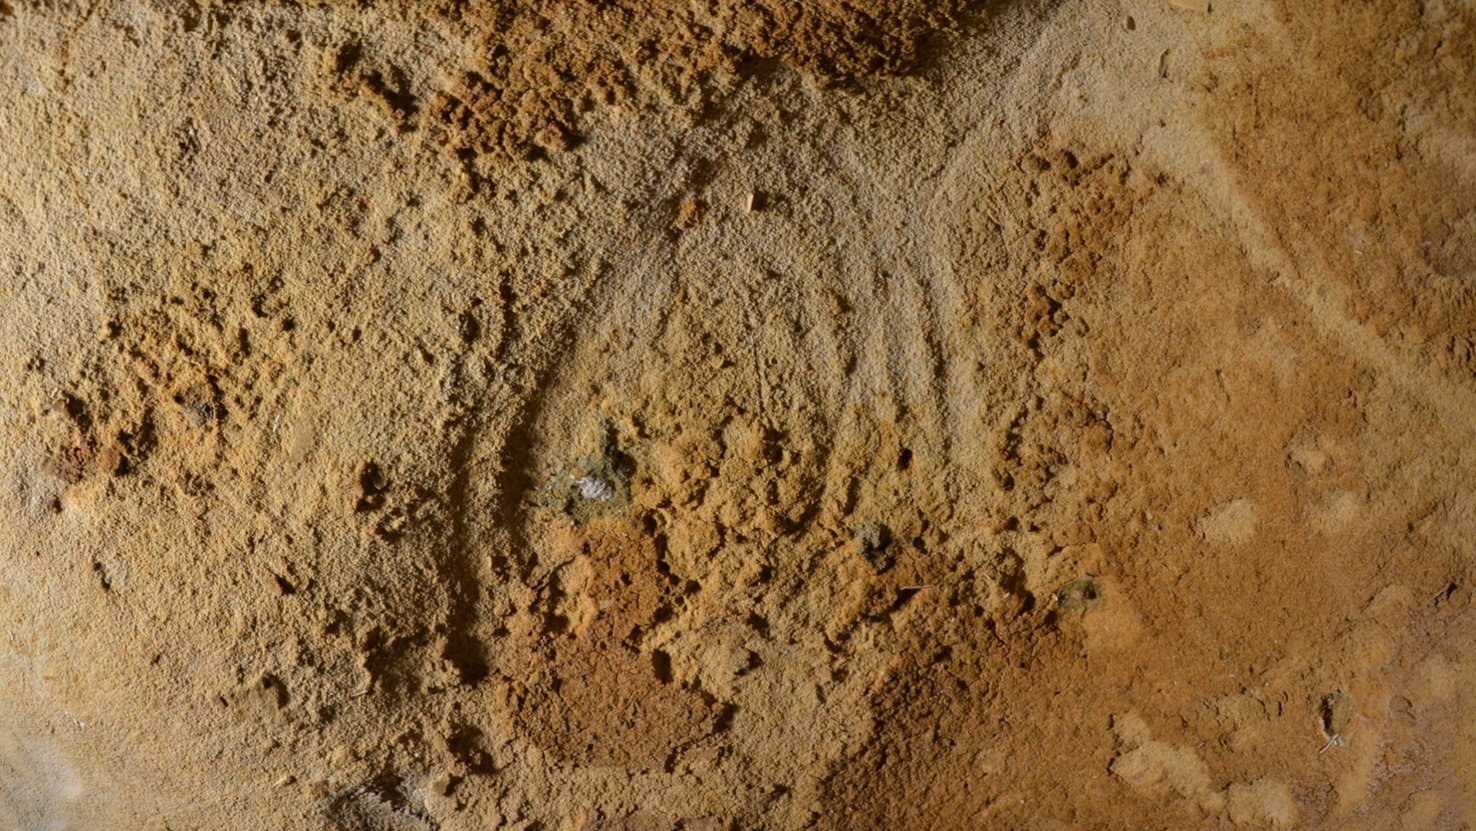 The suspected Neanderthal artwork found in a French cave. (Photo: Marquet et al., PLoS One 2023)